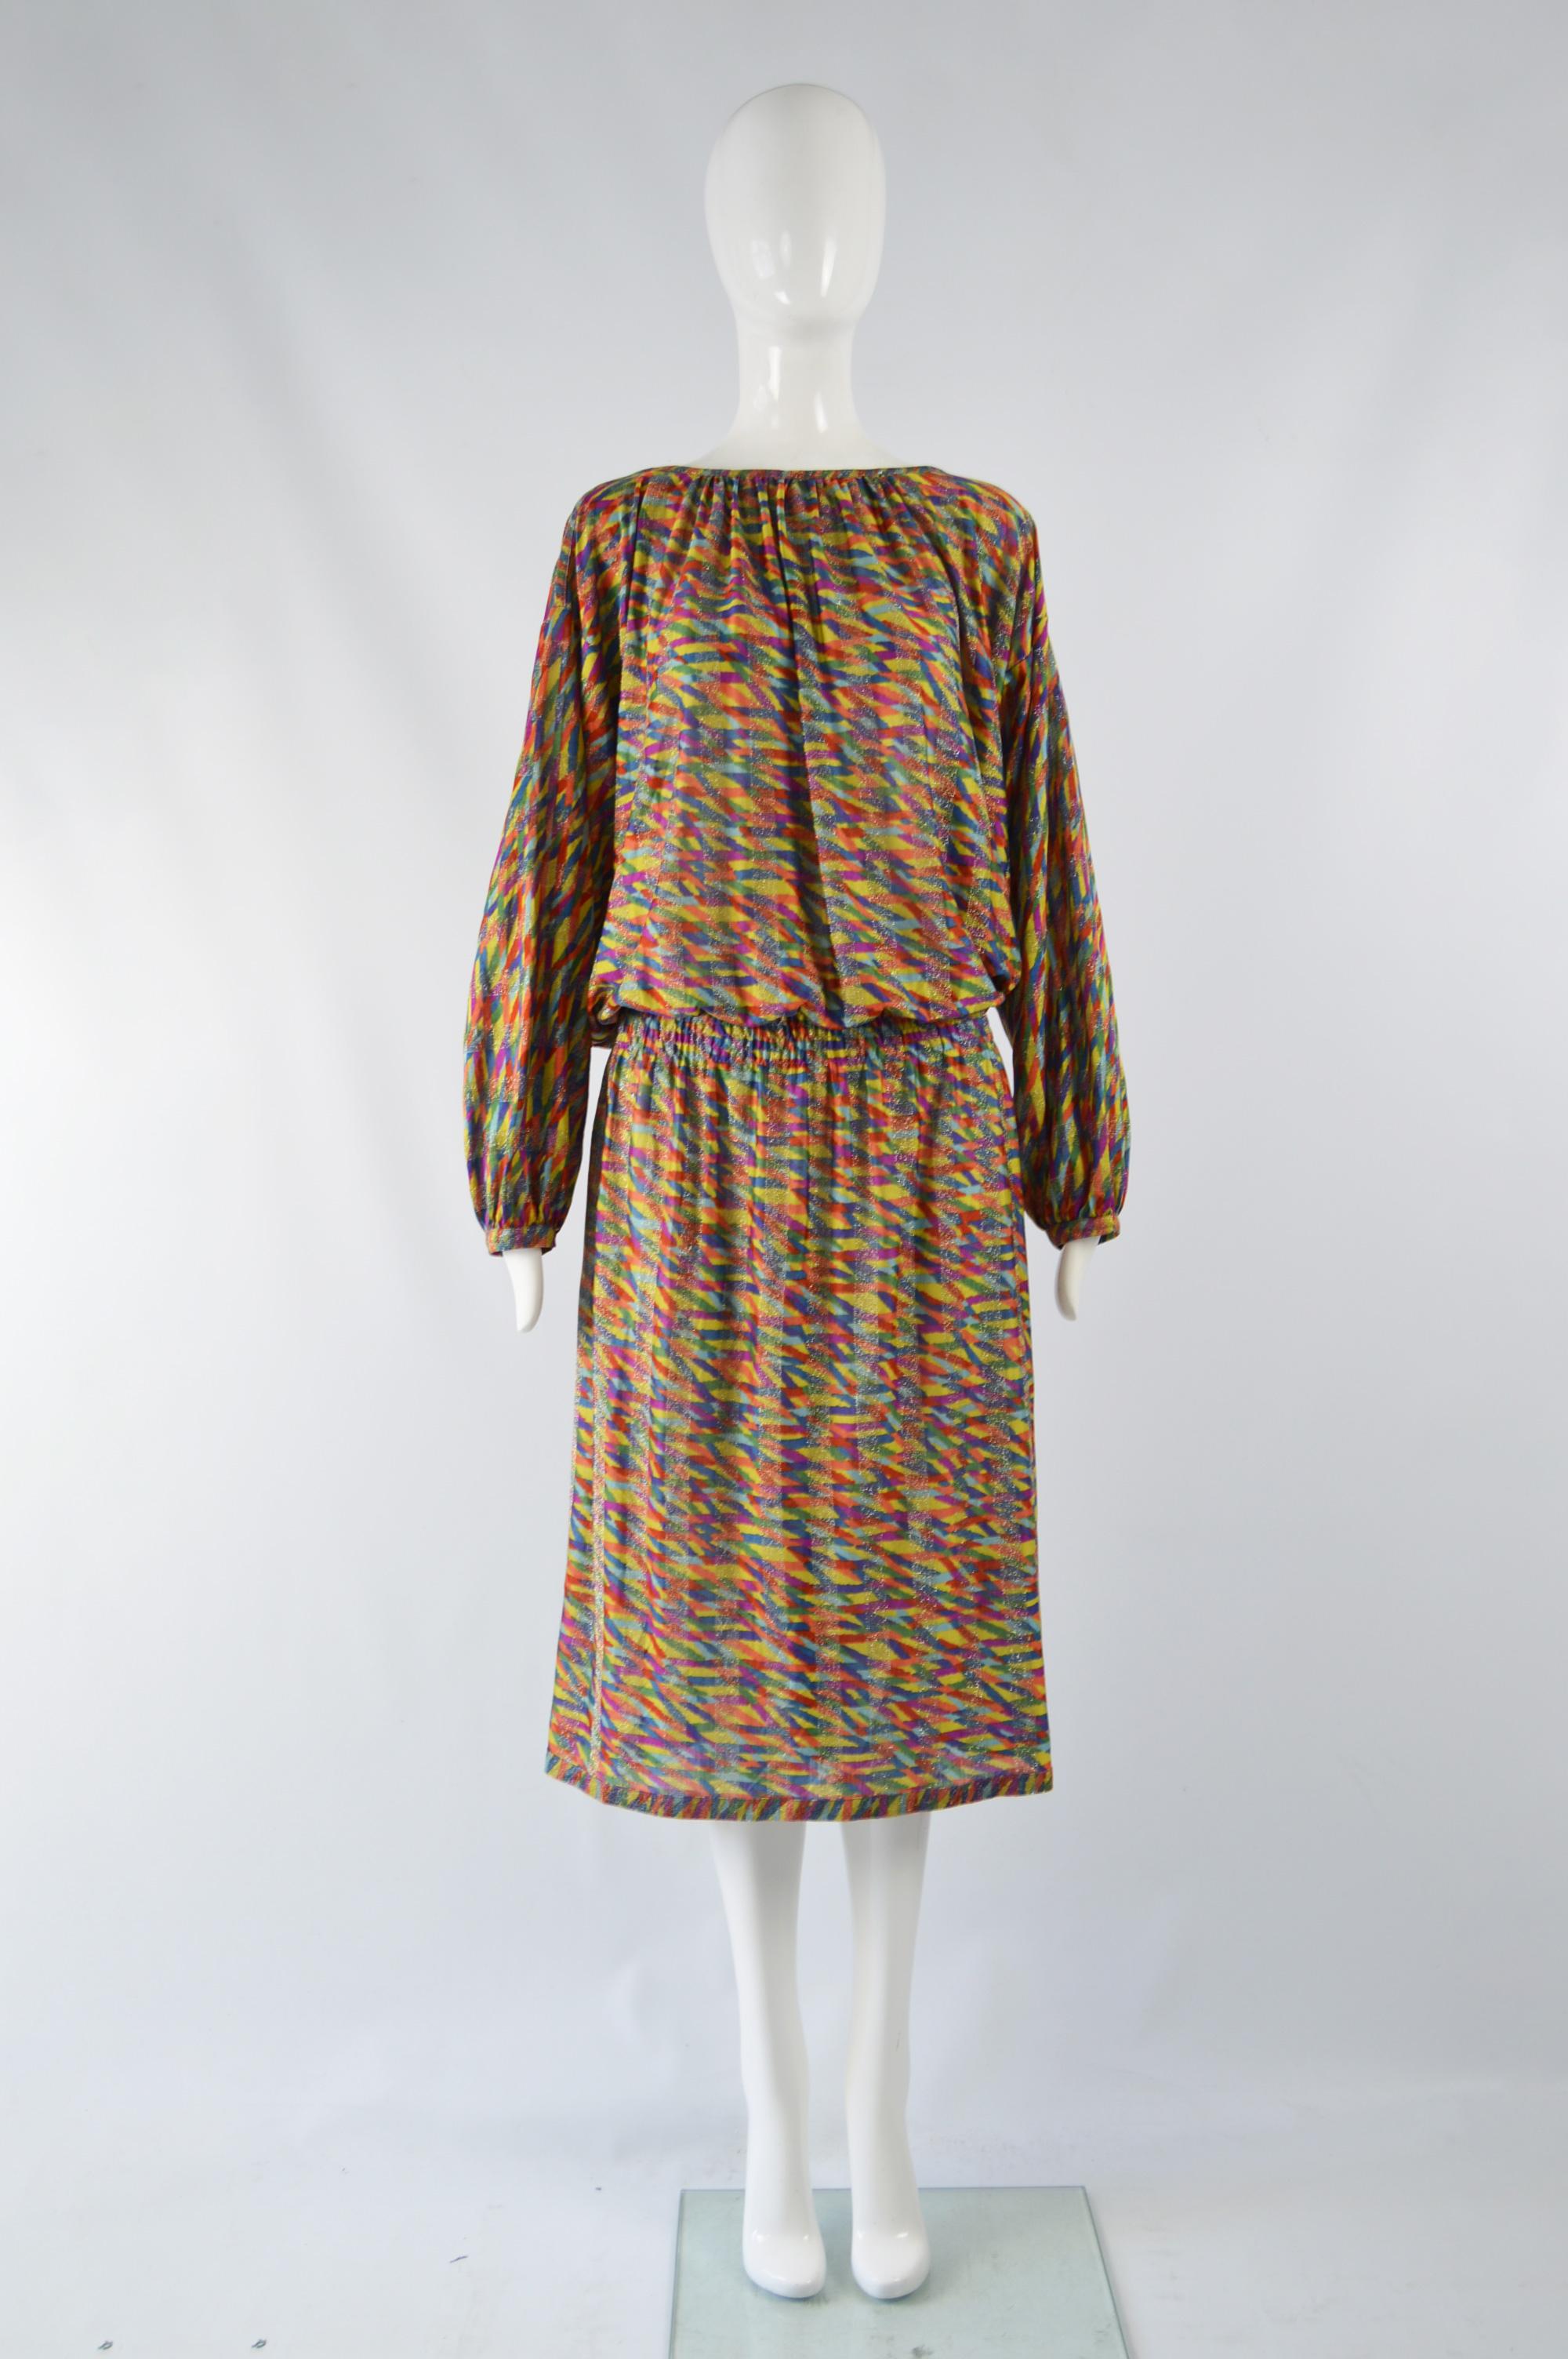 An incredible and rare vintage Missoni dress from the late 80s. In a rainbow patterned silk knit with silver, sparkly lurex stripes throughout for a glamorous evening look. It has an elasticated waist and loose, blouson fit on top. 

Size: Marked